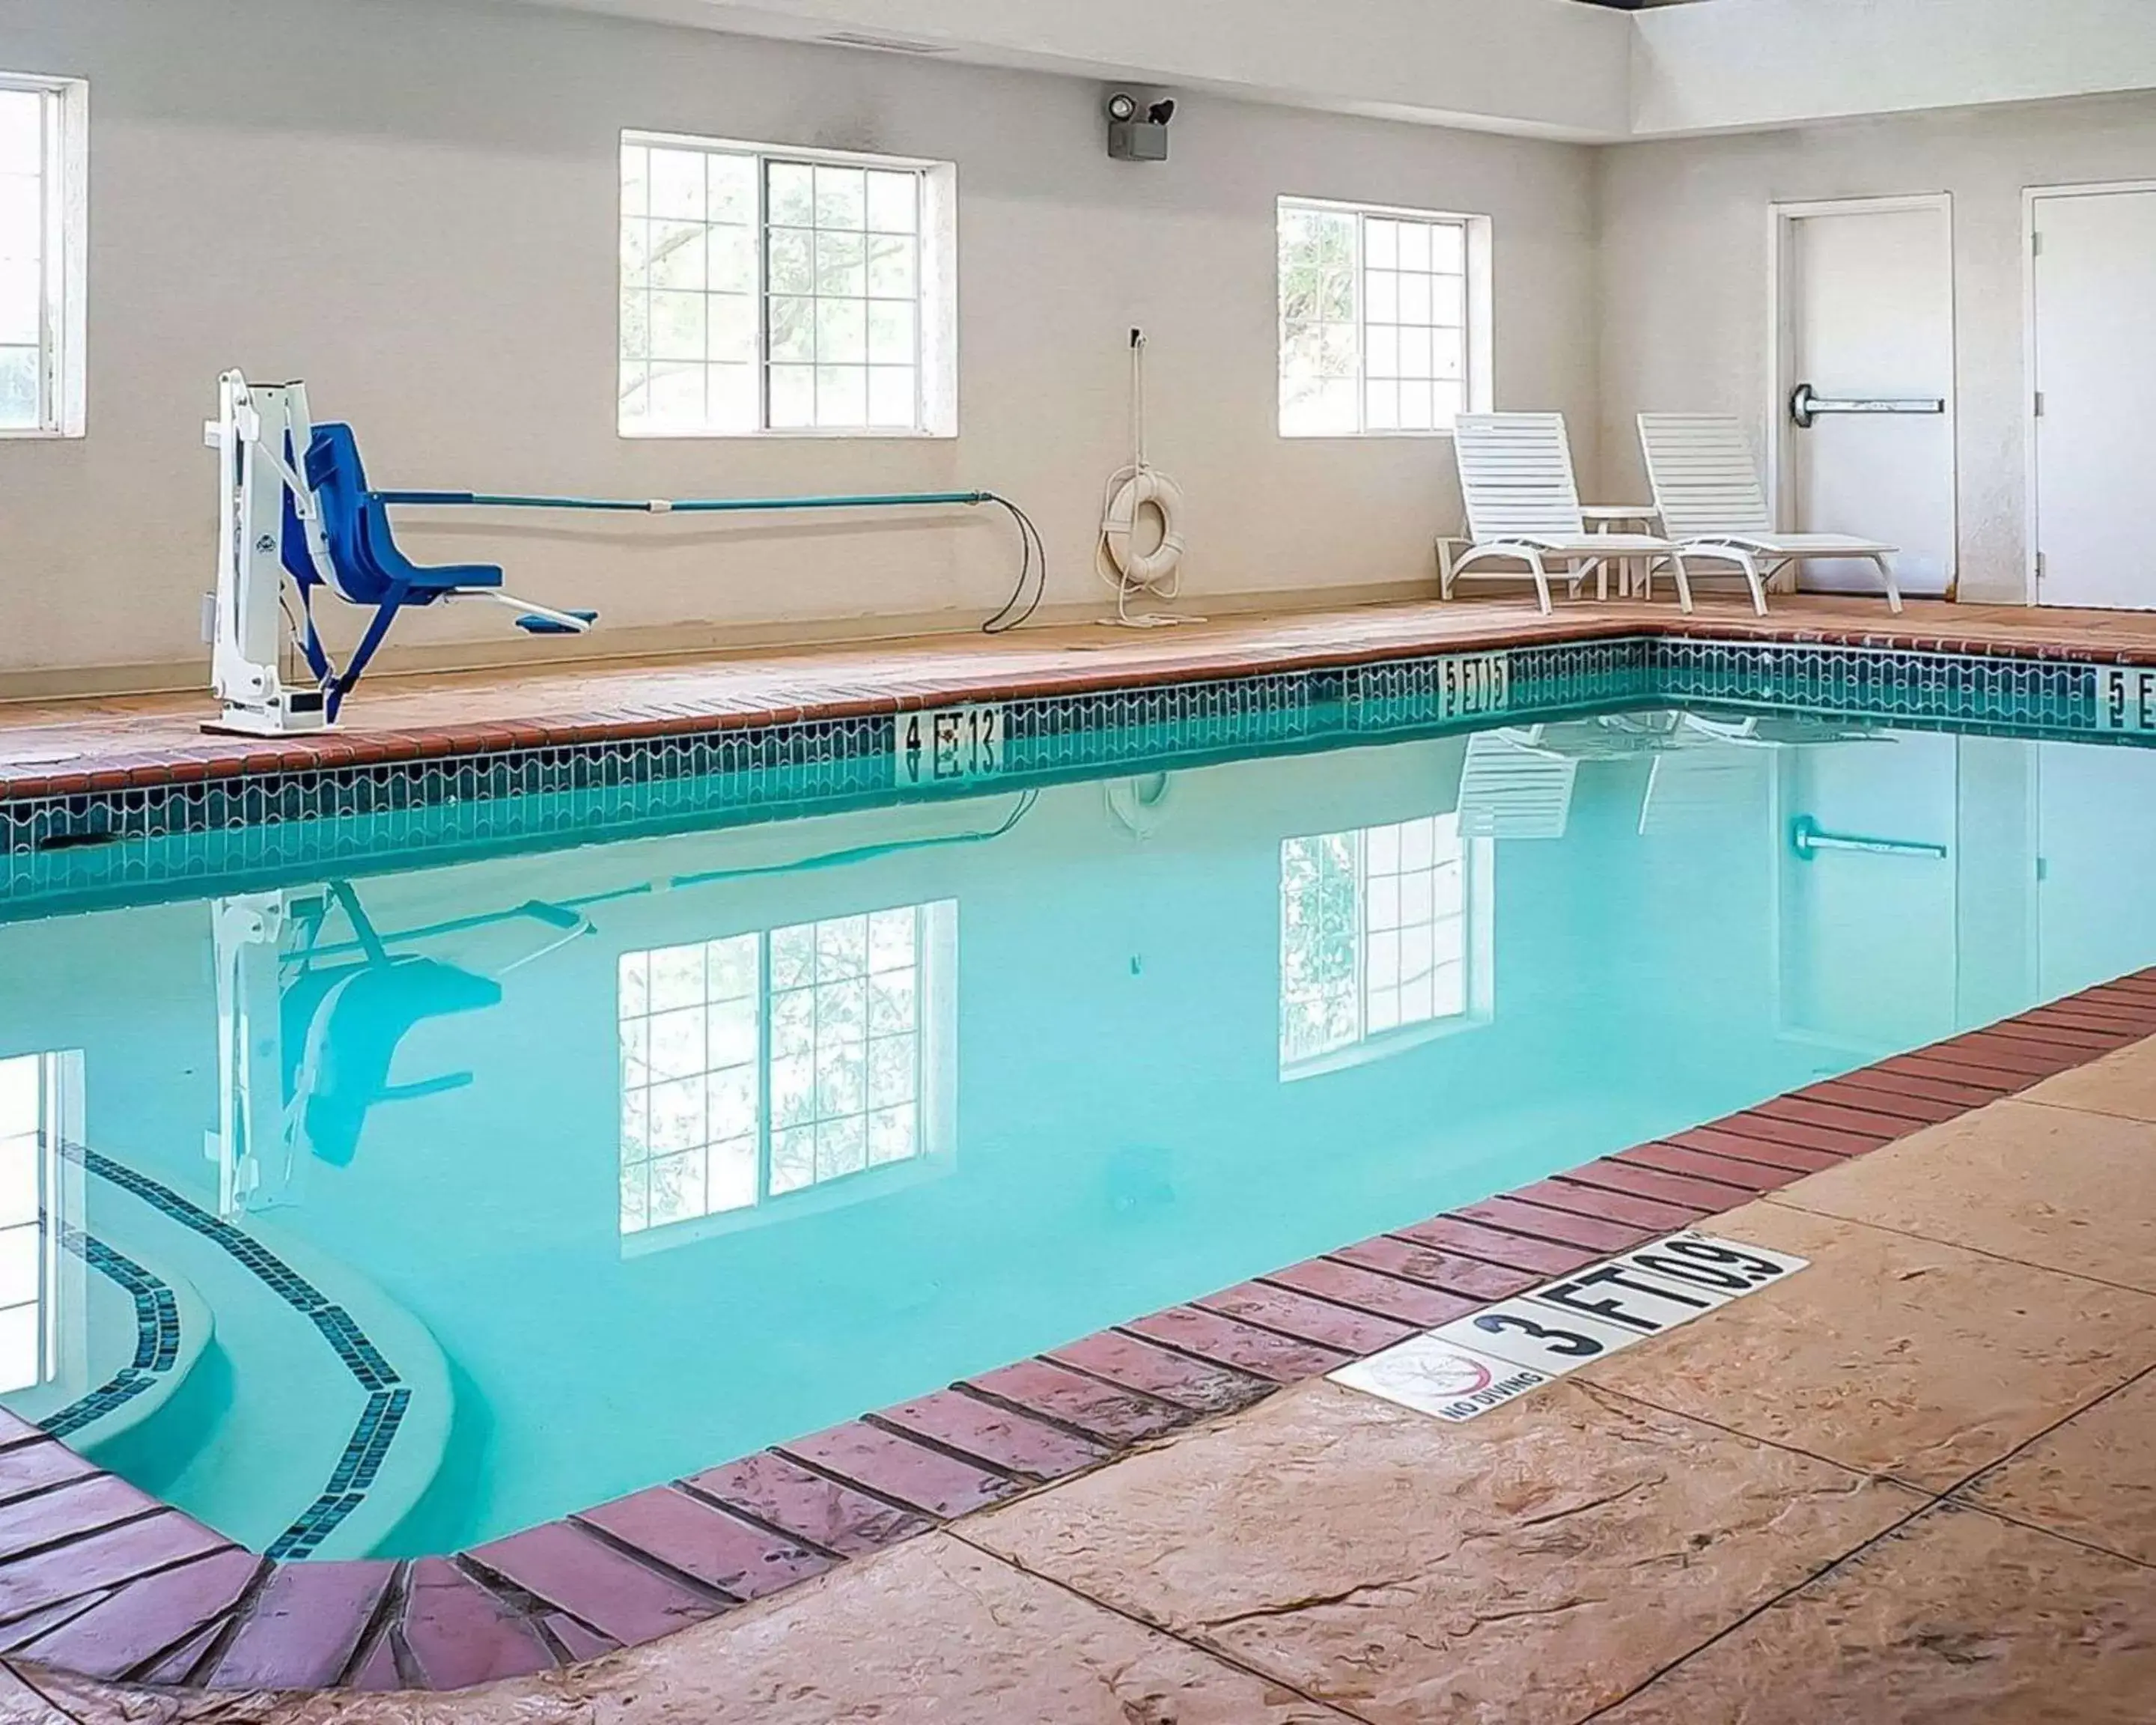 On site, Swimming Pool in Quality Inn & Suites Roswell